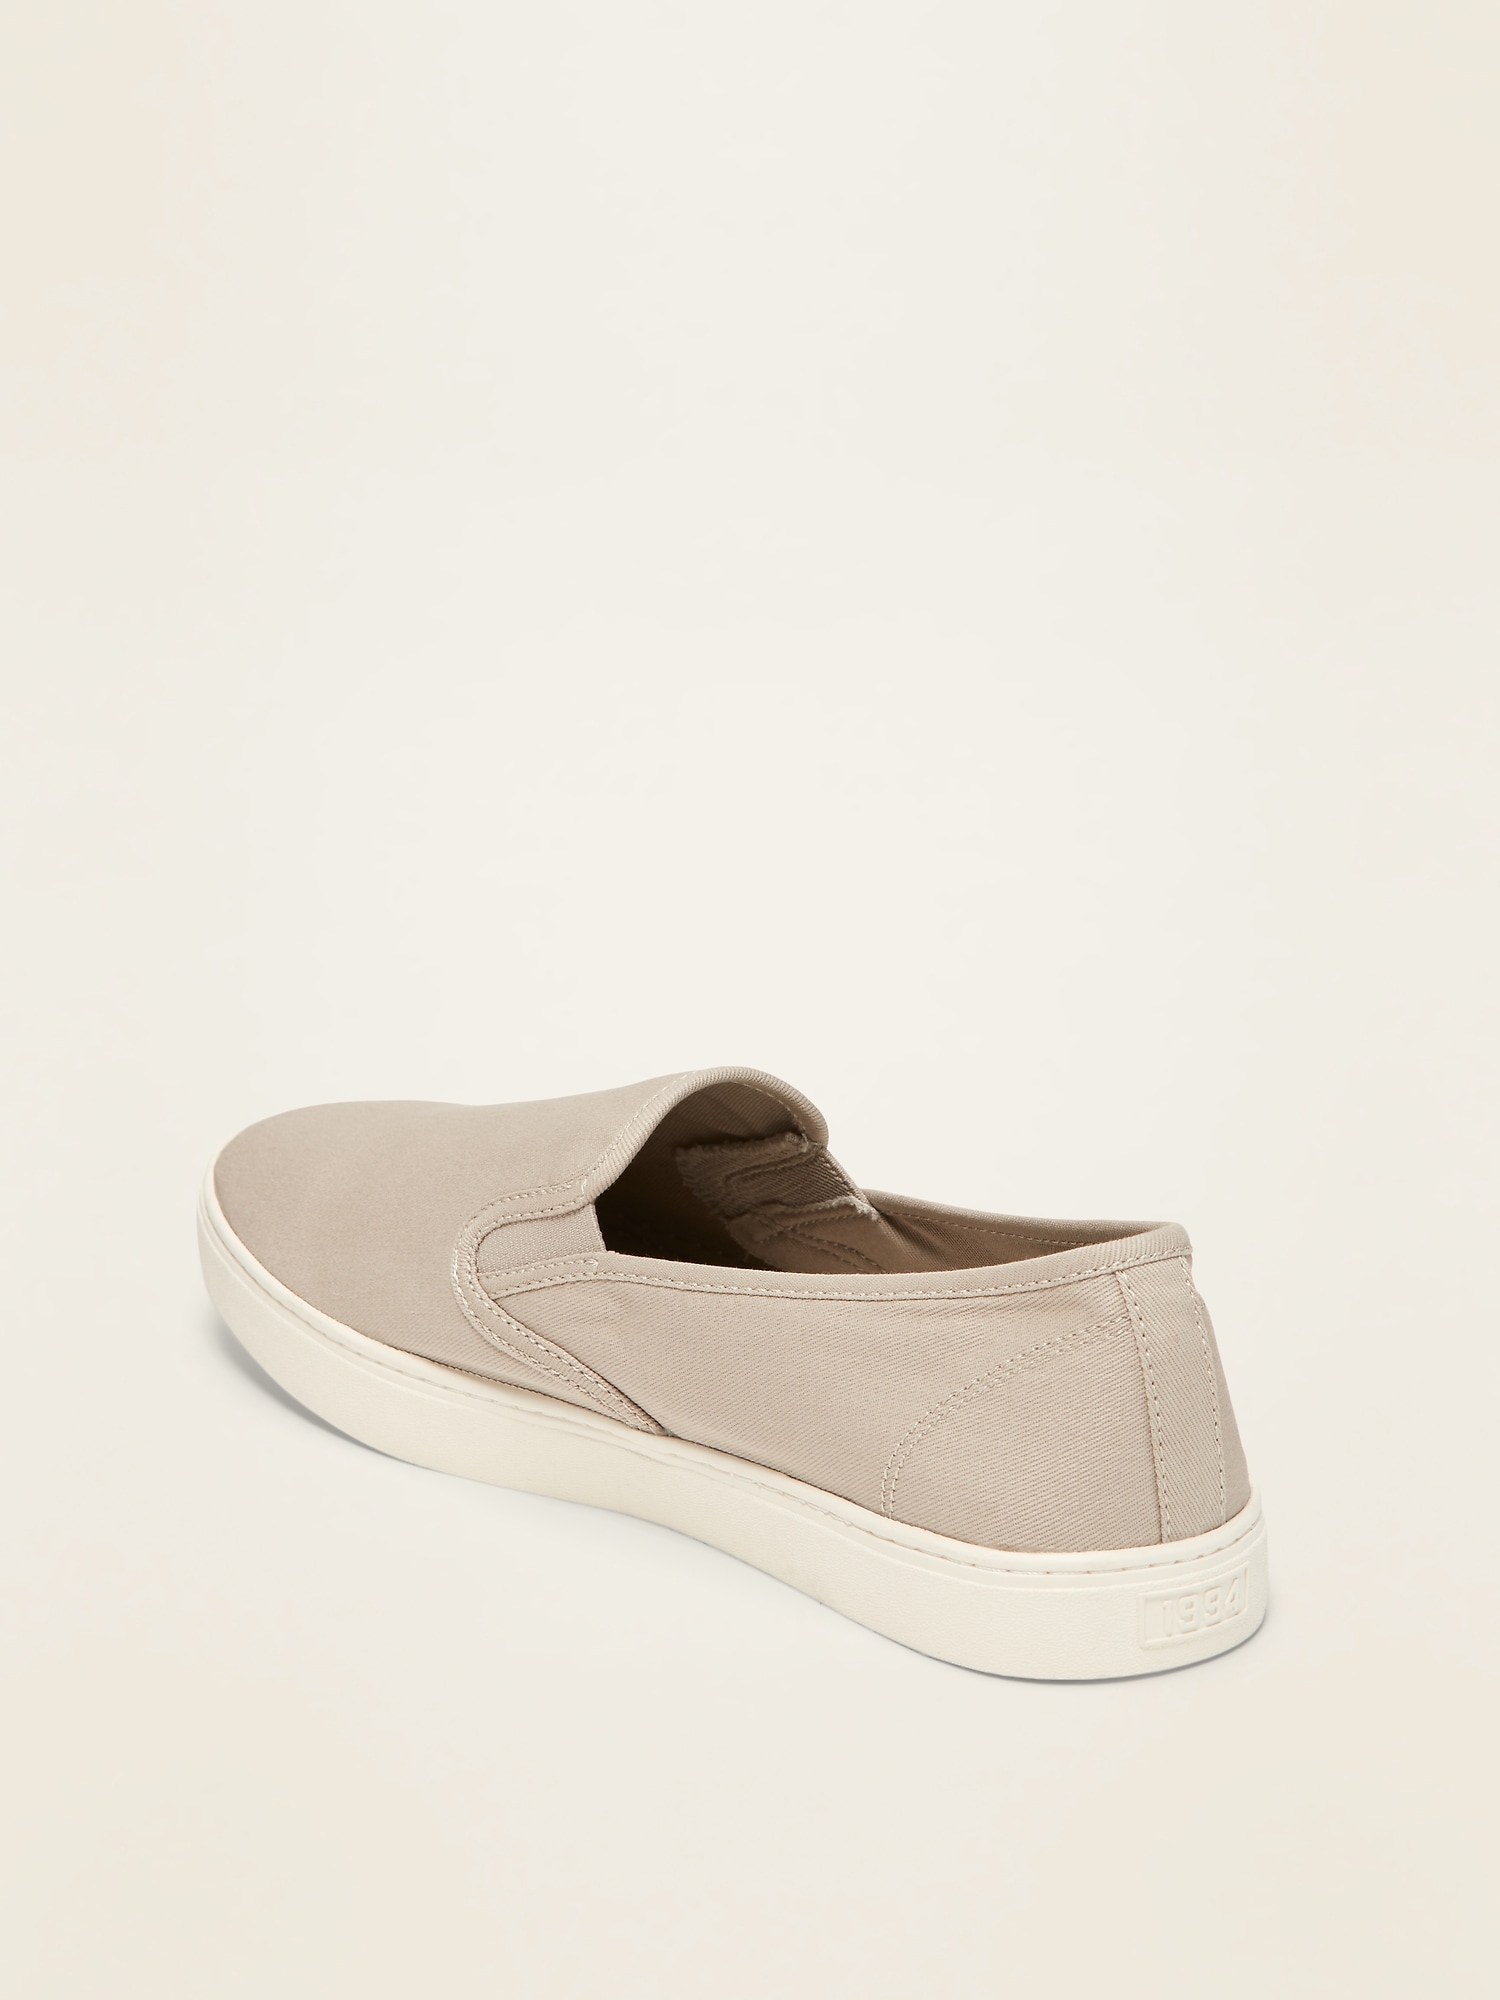 womens navy canvas slip on shoes